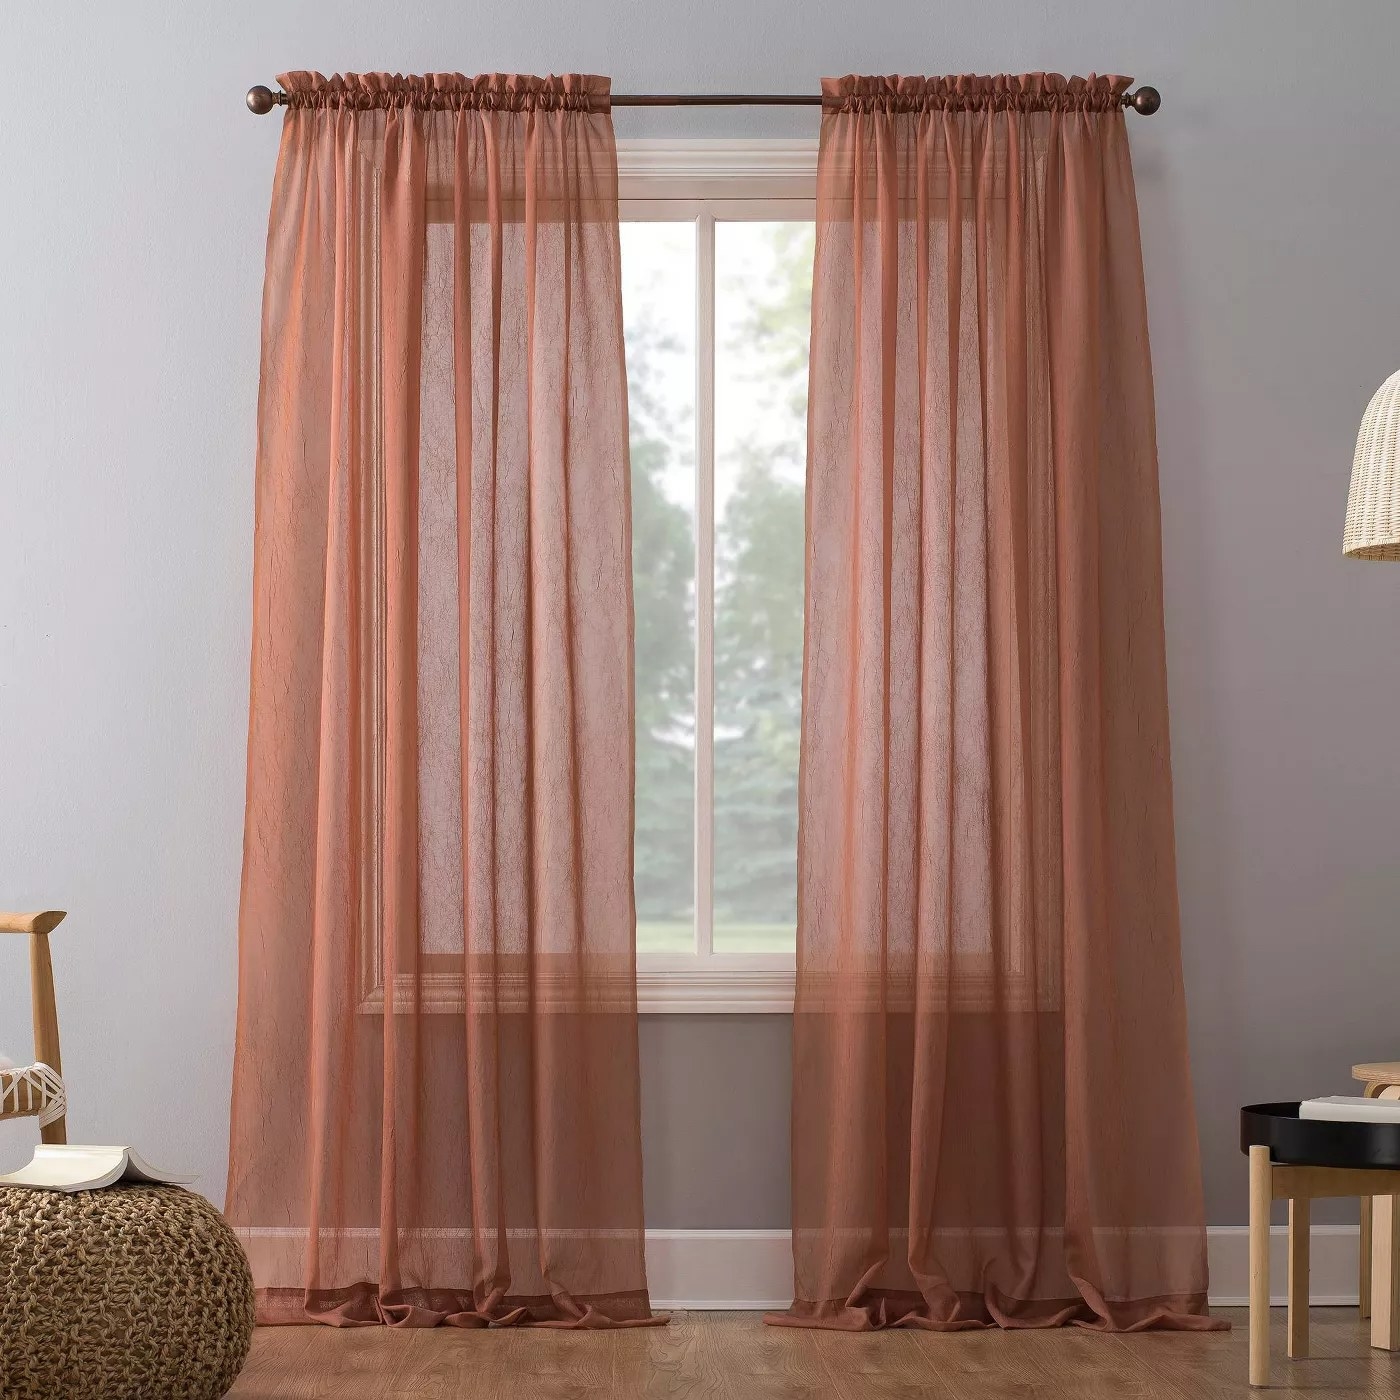 The sheer curtains are in a blush orange color and hung in a lit and cool-toned room